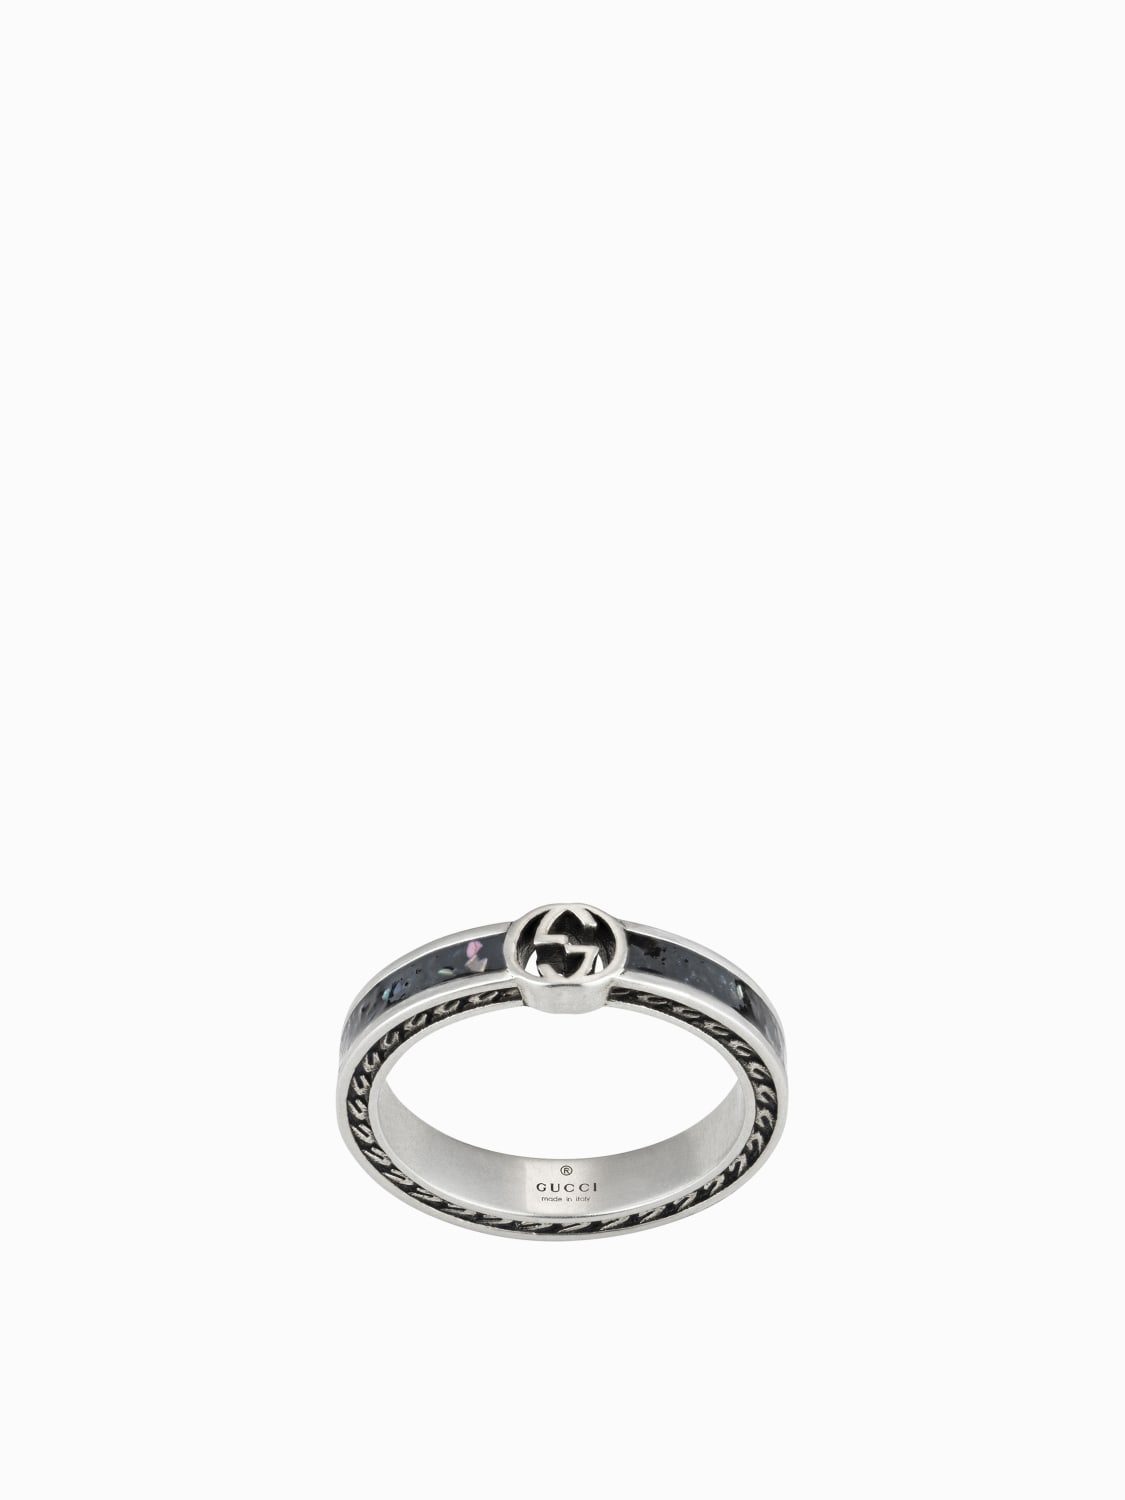 GUCCI: Interlking G ring in enamelled silver with GG monogram and ...